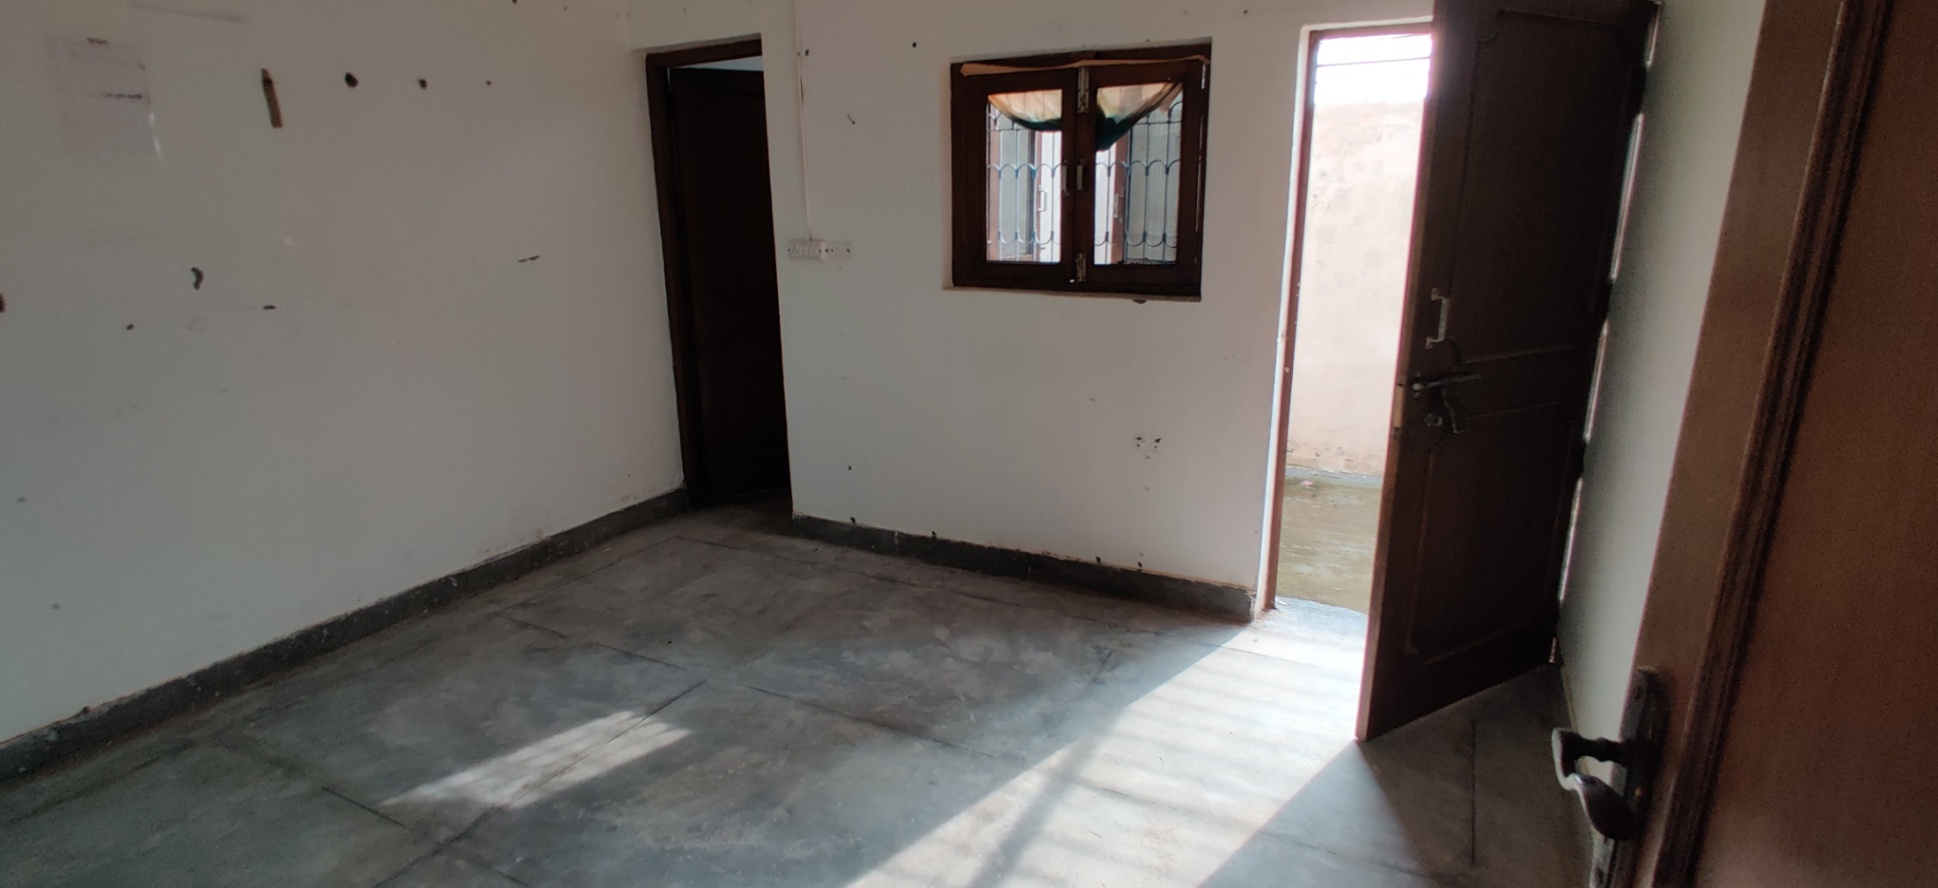 2 Bed/ 2 Bath House/ Bungalow/ Villa, UnFurnished for rent @Noida sector 131, (Jaypee wish town)